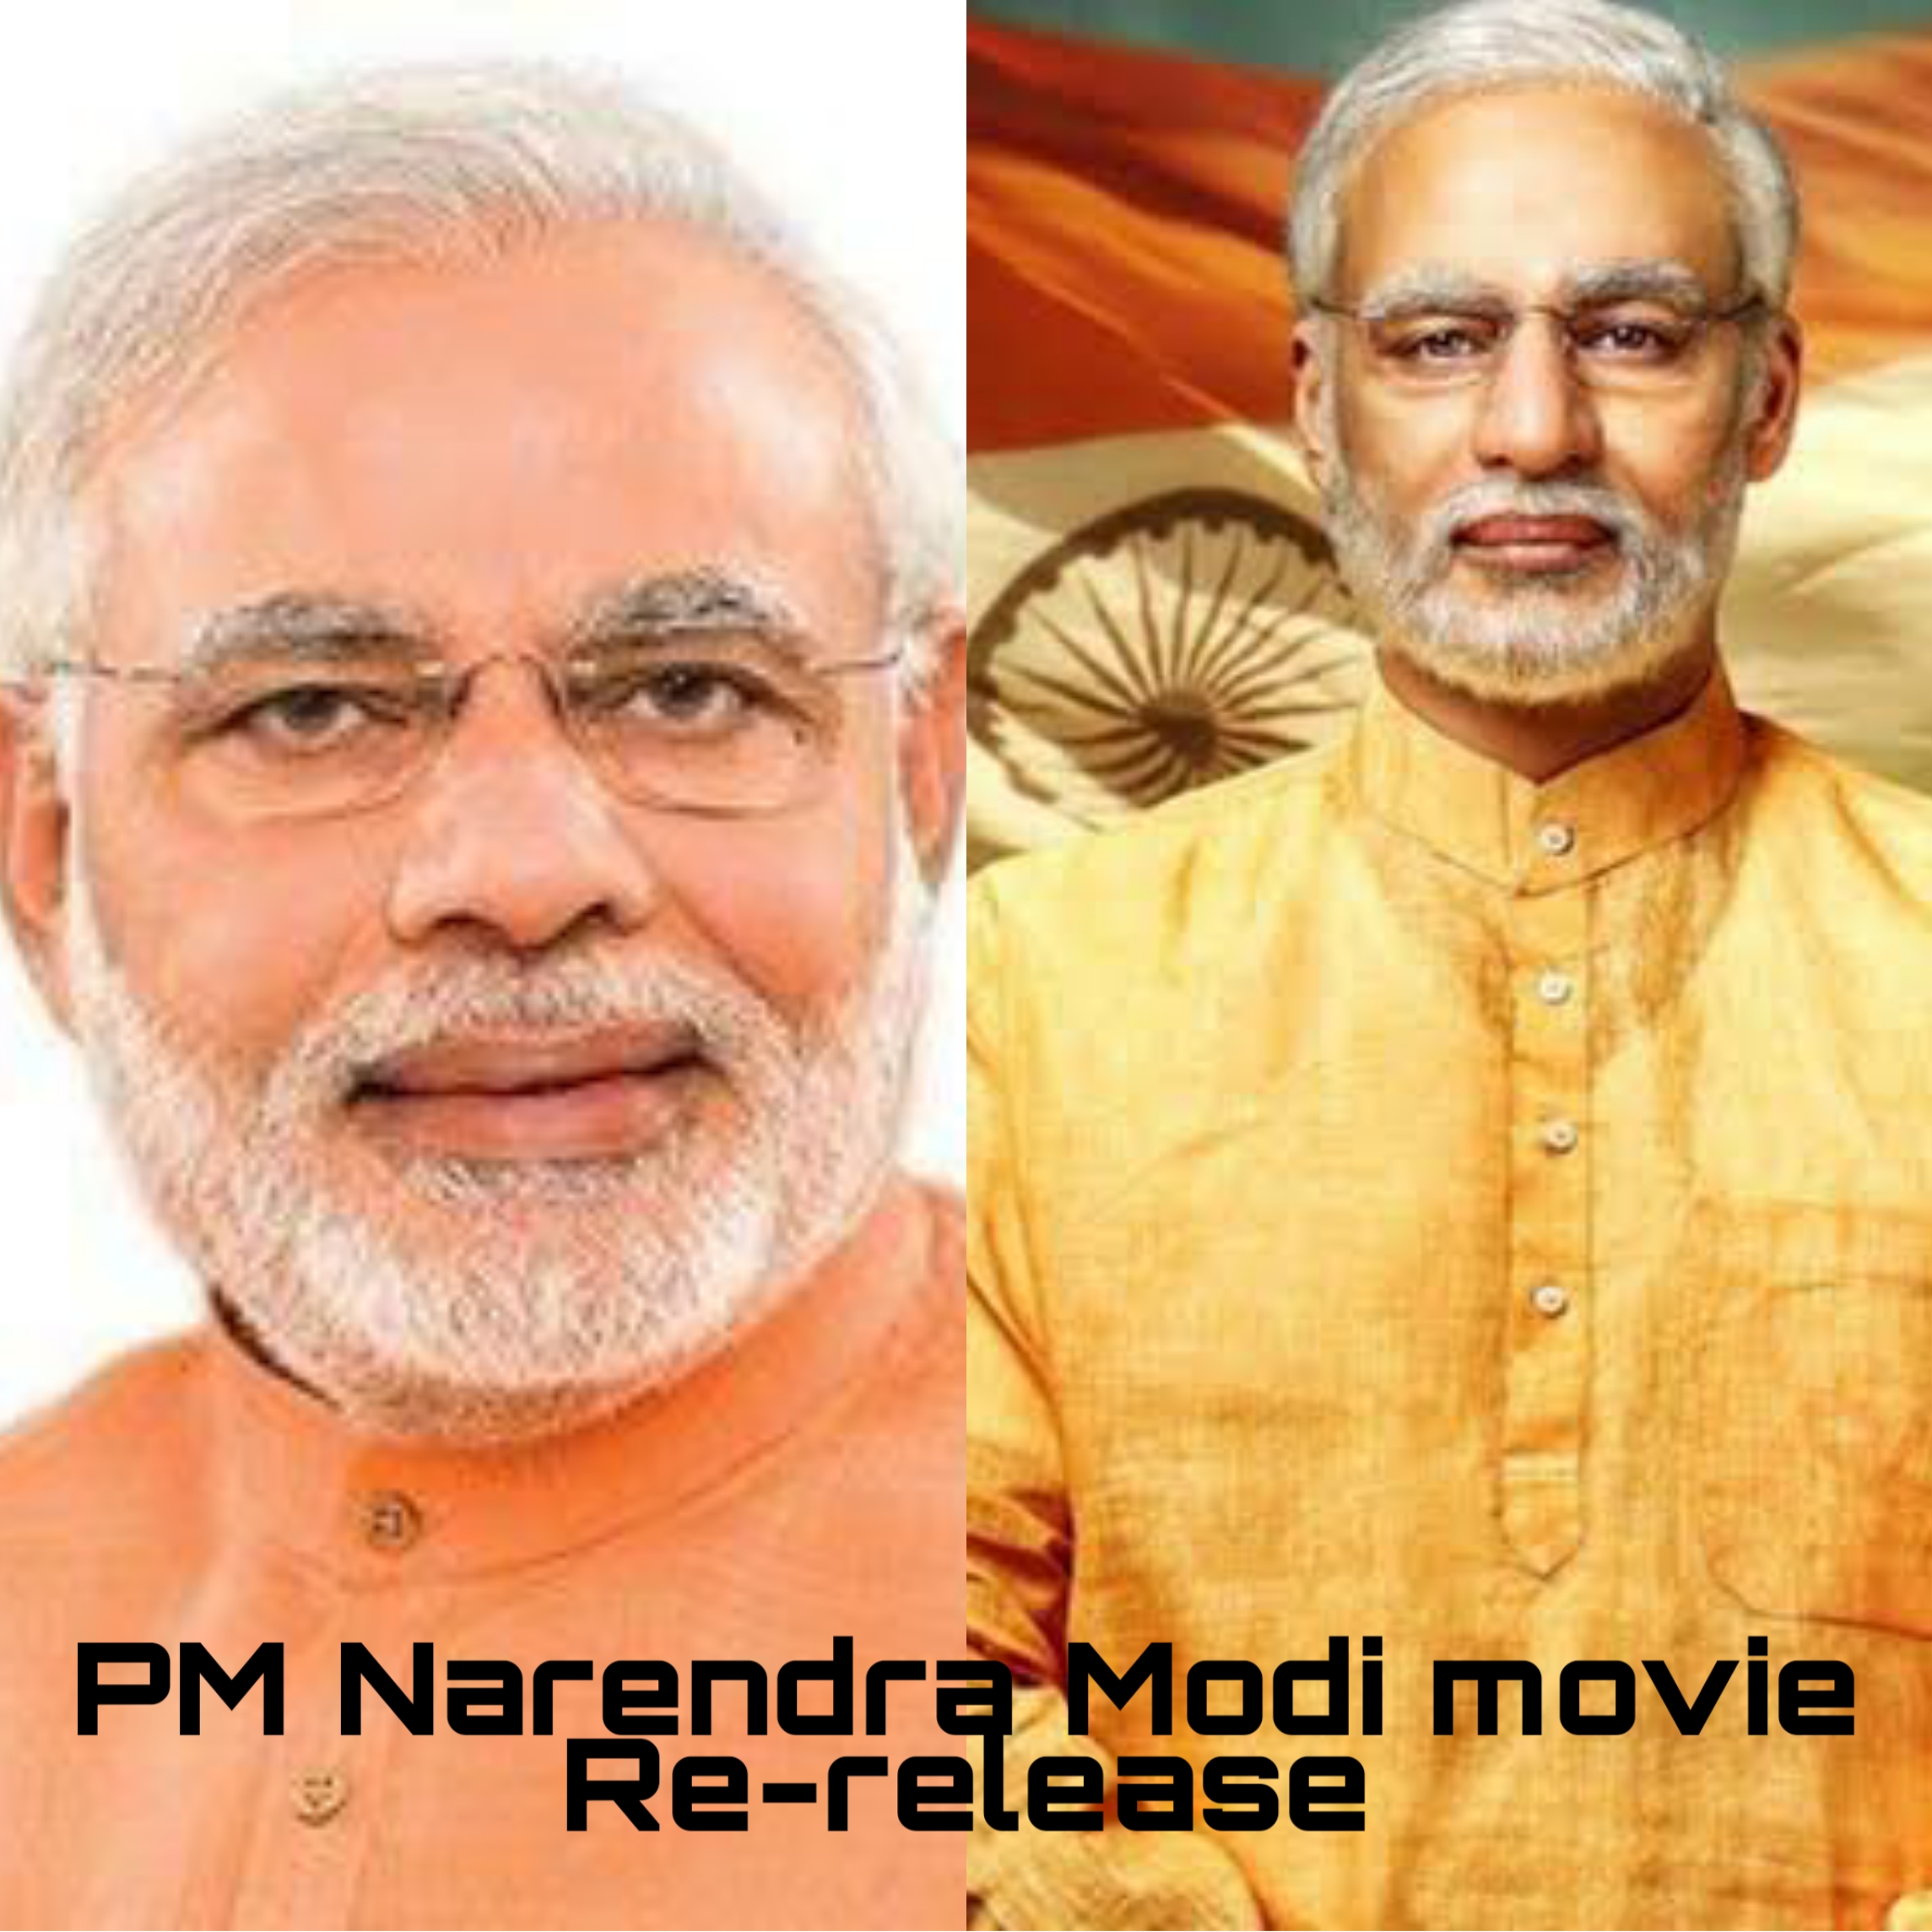 PM Narendra Modi movie will be re-released in theaters from October 16